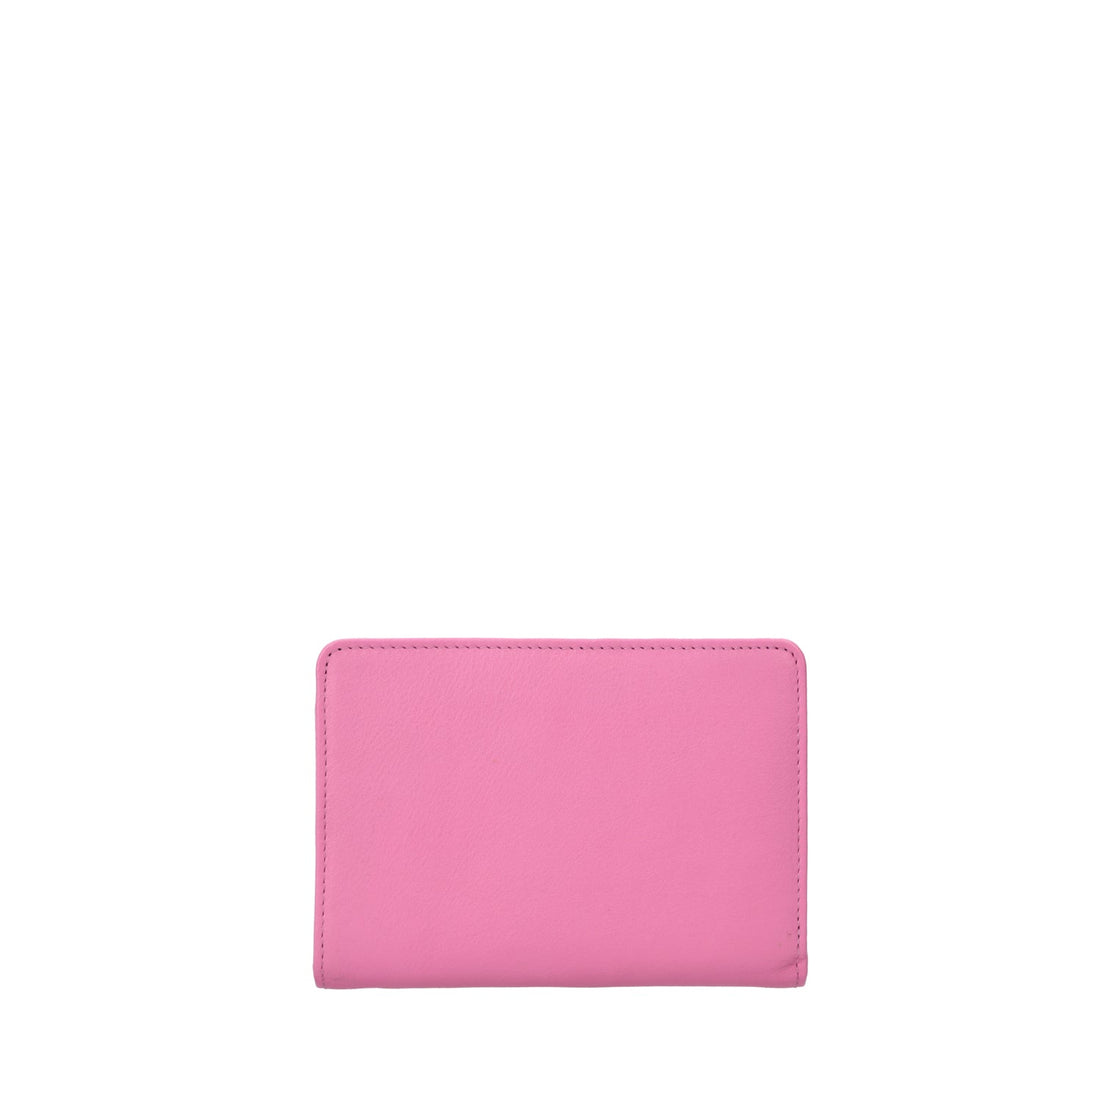 PINK BASIC WALLETS WALLET IN LEATHER